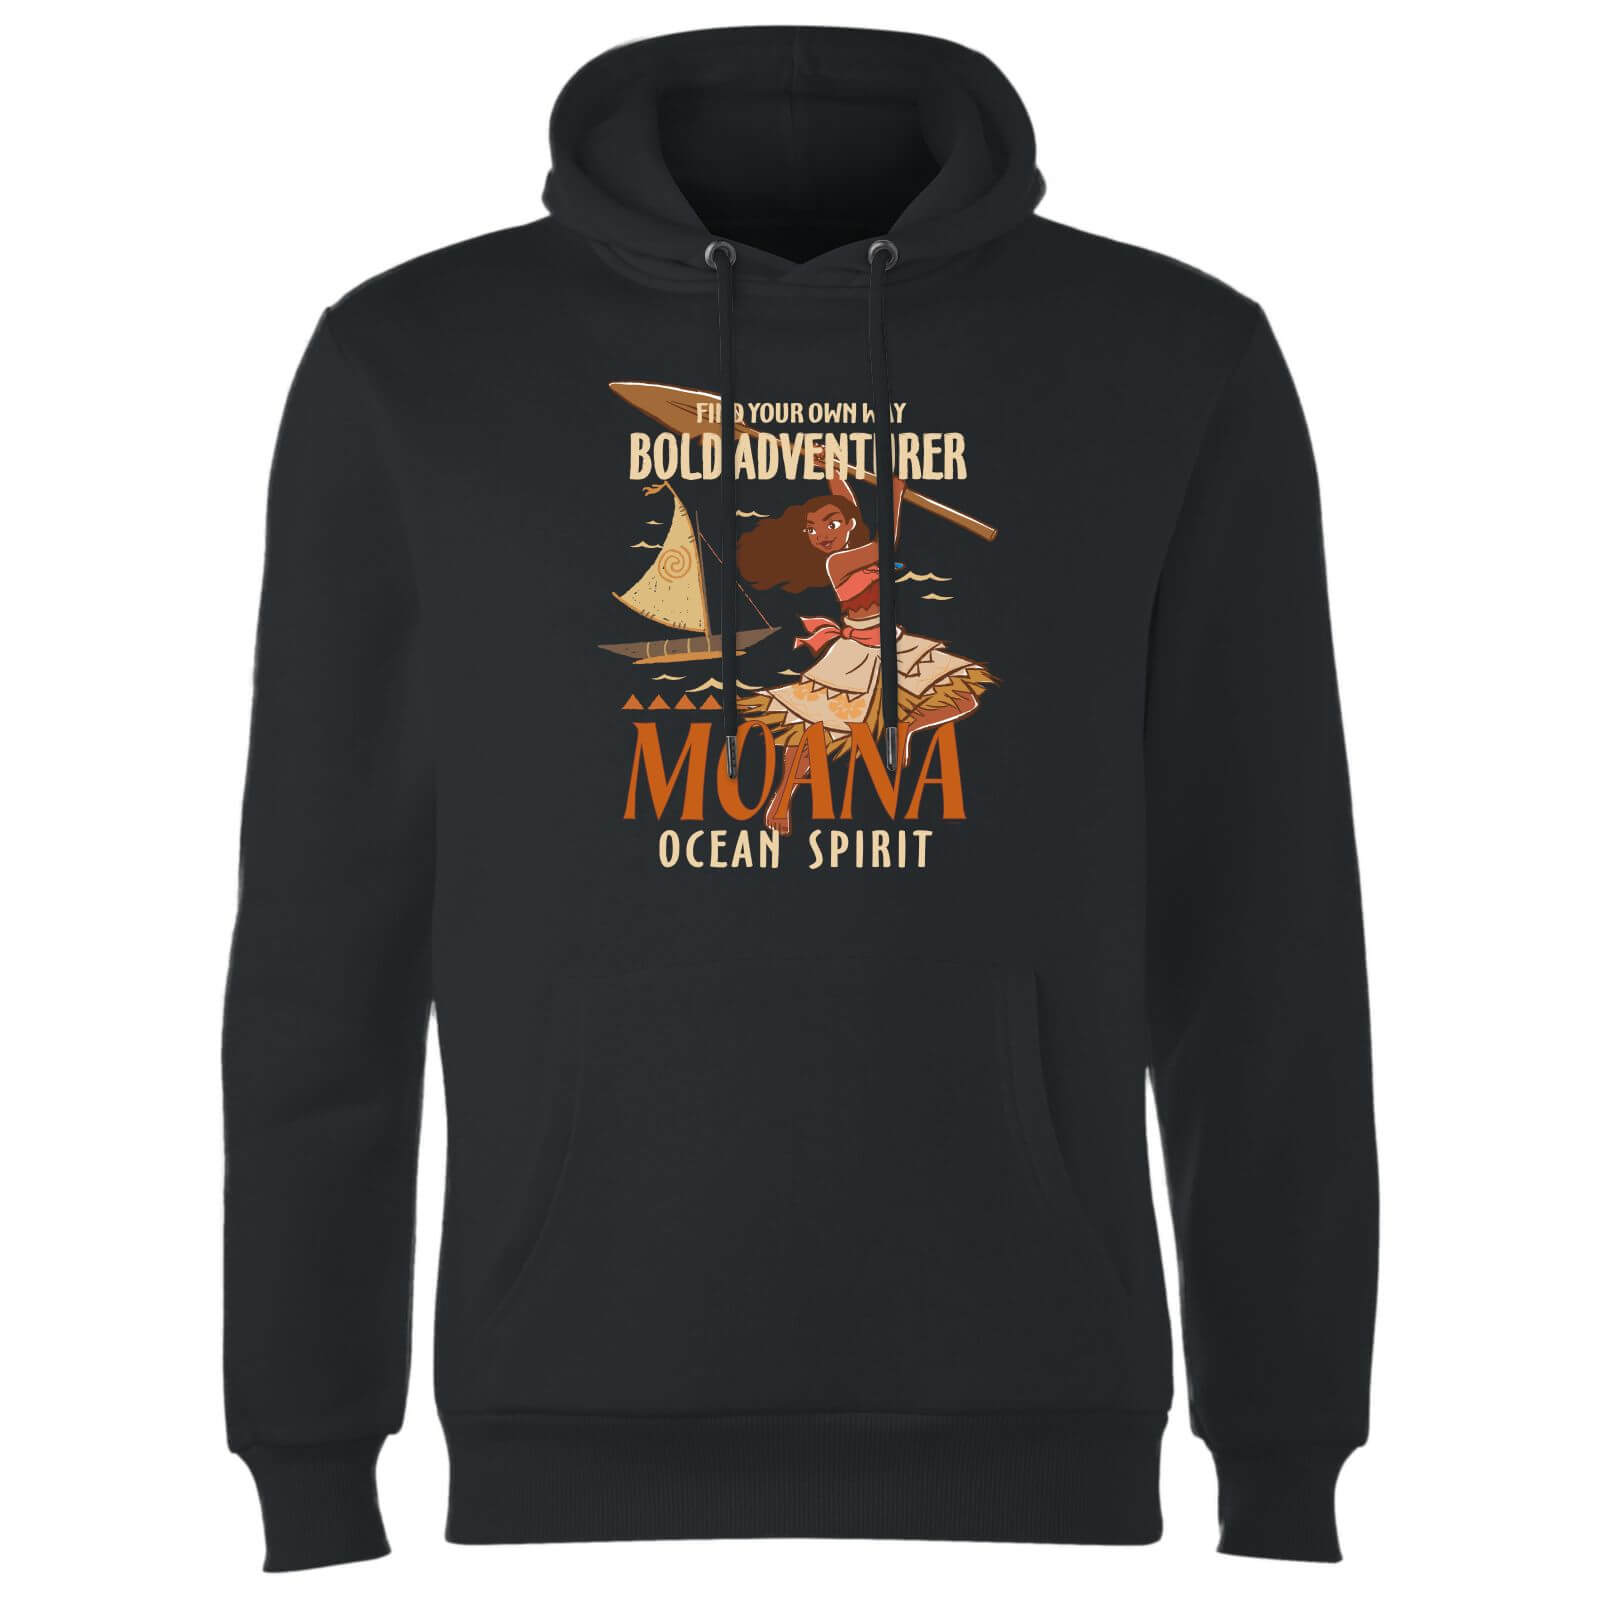 moana find your own way hoodie - black - l